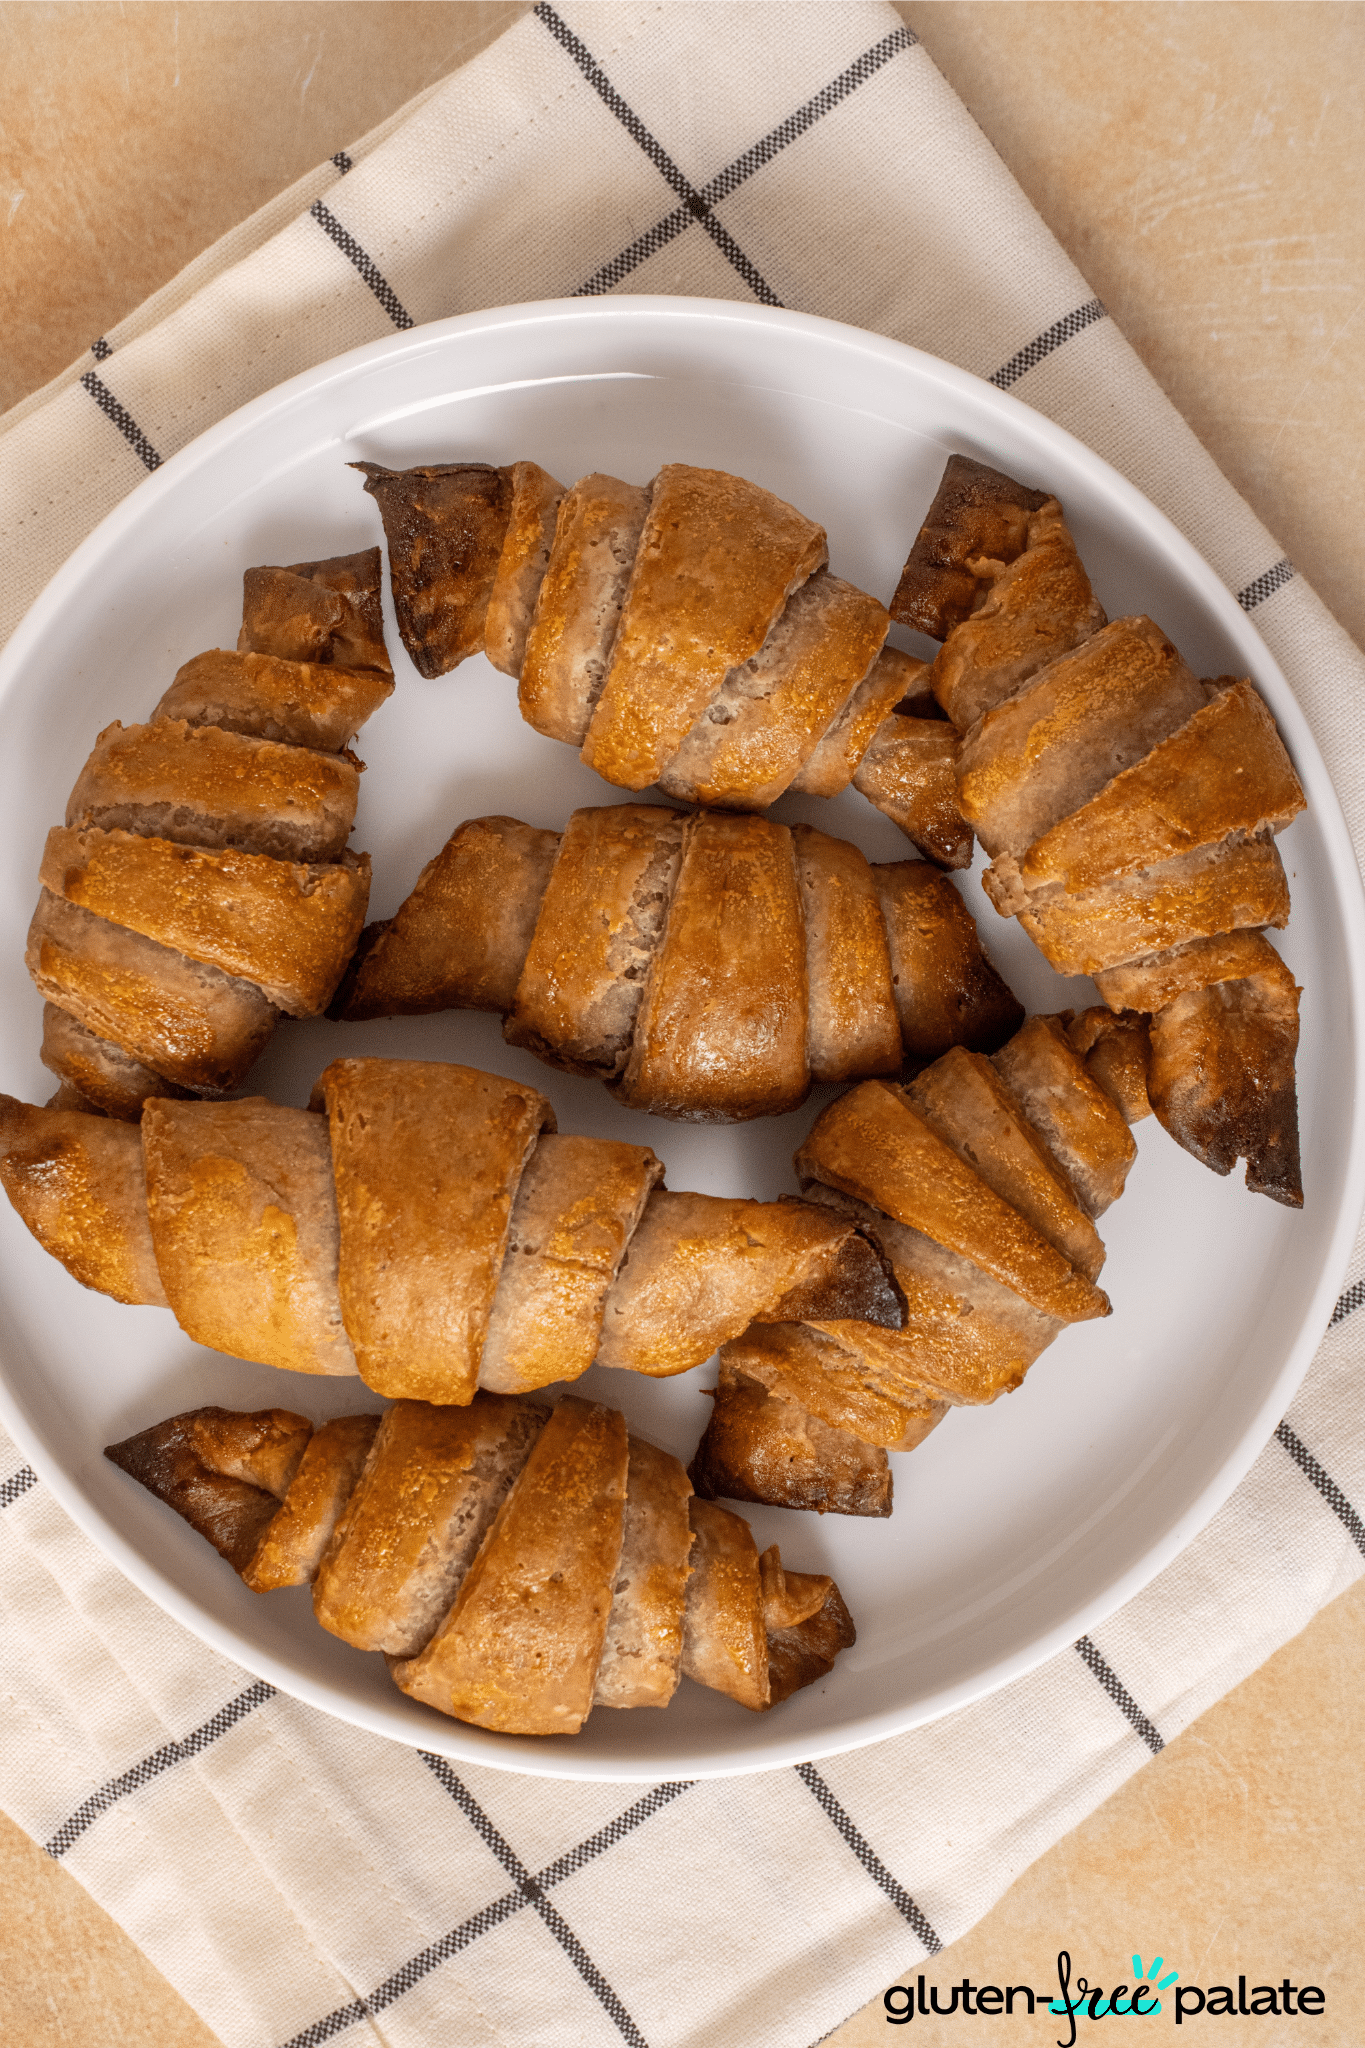 gluten-free croissant on a white plate